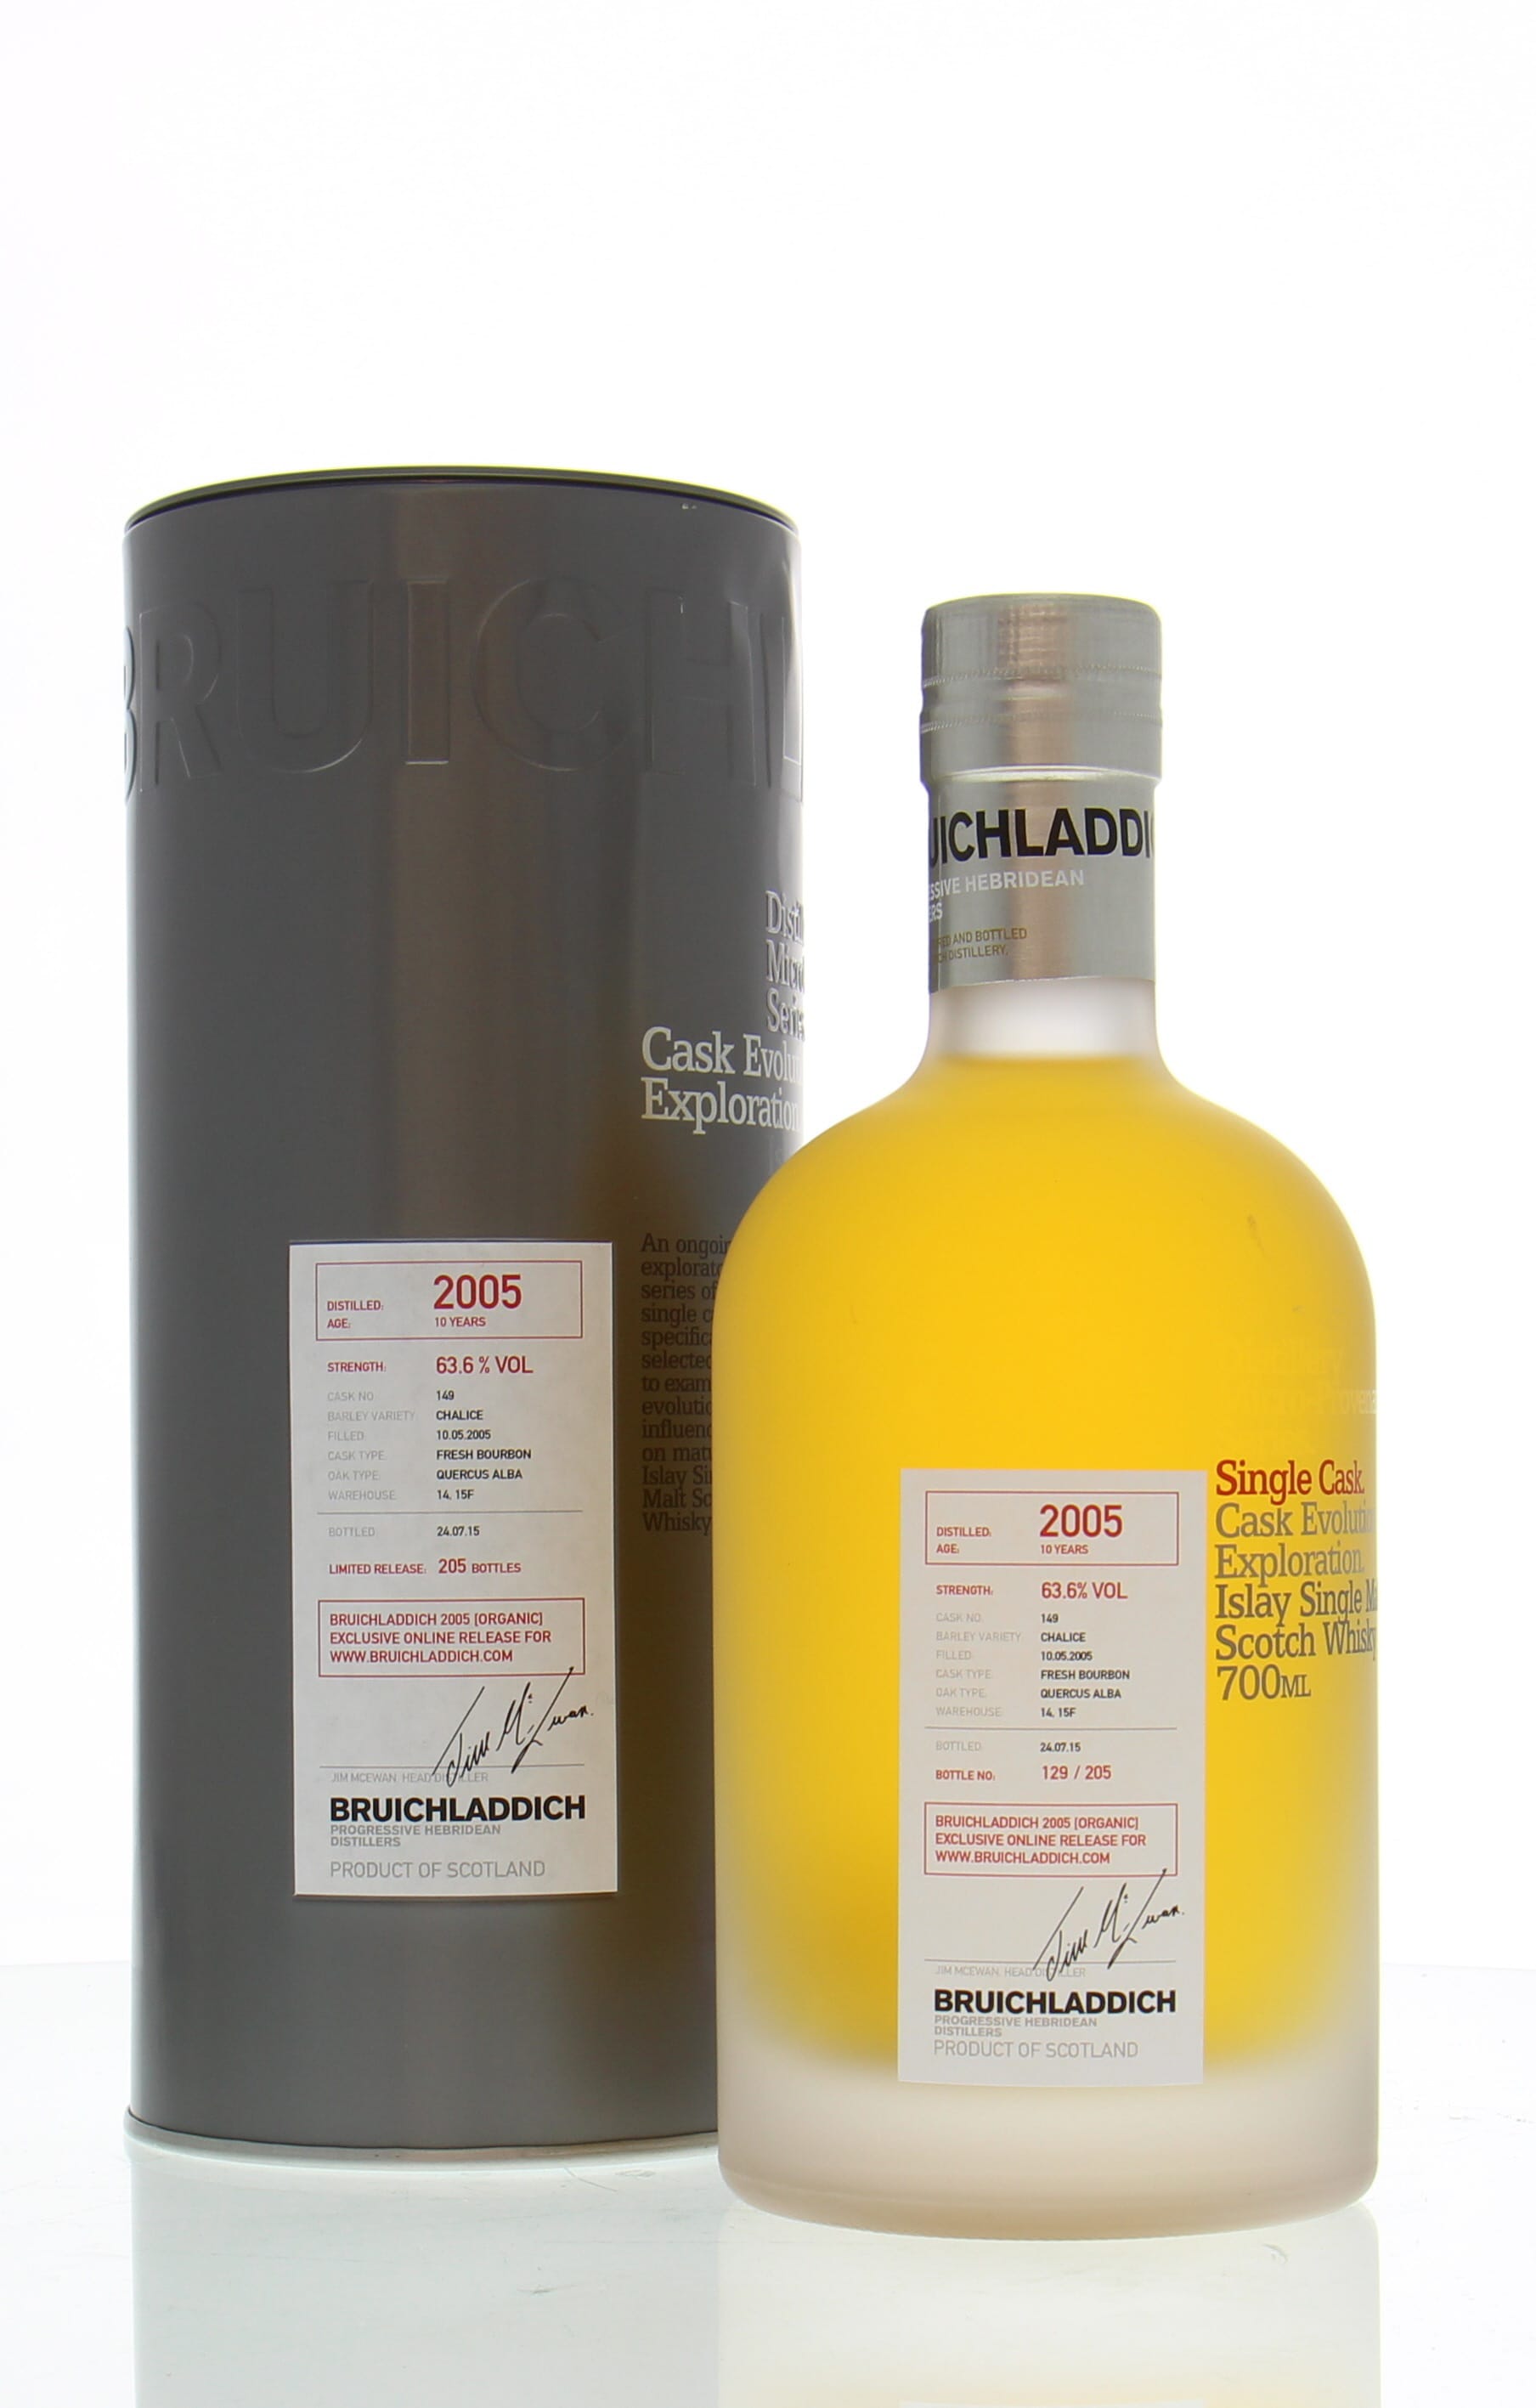 Bruichladdich - 10 Years Old Micro Provenance Series 2005 Cask:149 63.6% 2005 In Original Container